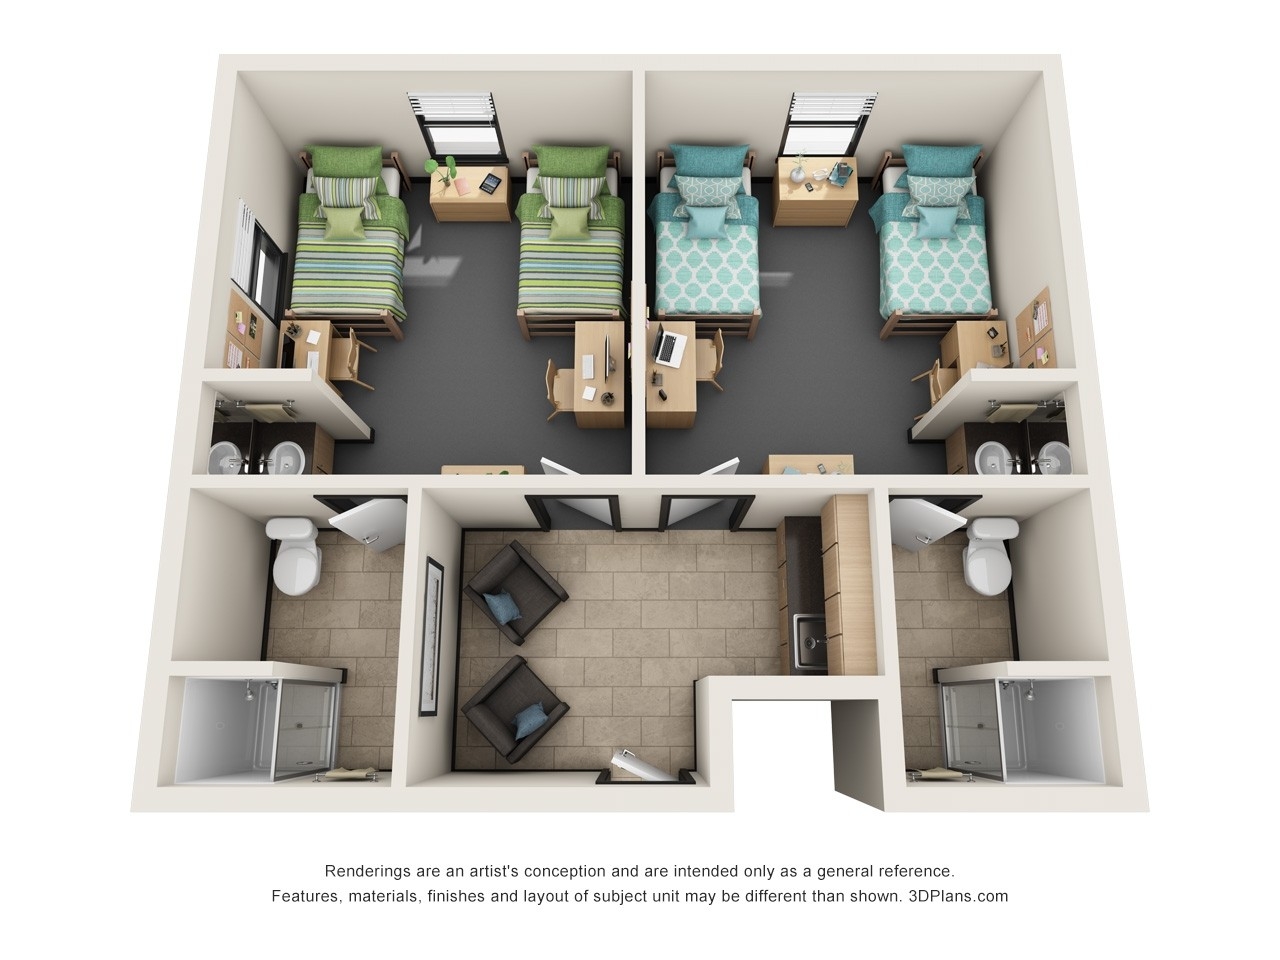 Rendering of University Suites 2-Bedroom Suite. This rendering is an artist's conception and are intended only as a general reference. Features, materials, finishes and layout of subject unit may be different than shown. 